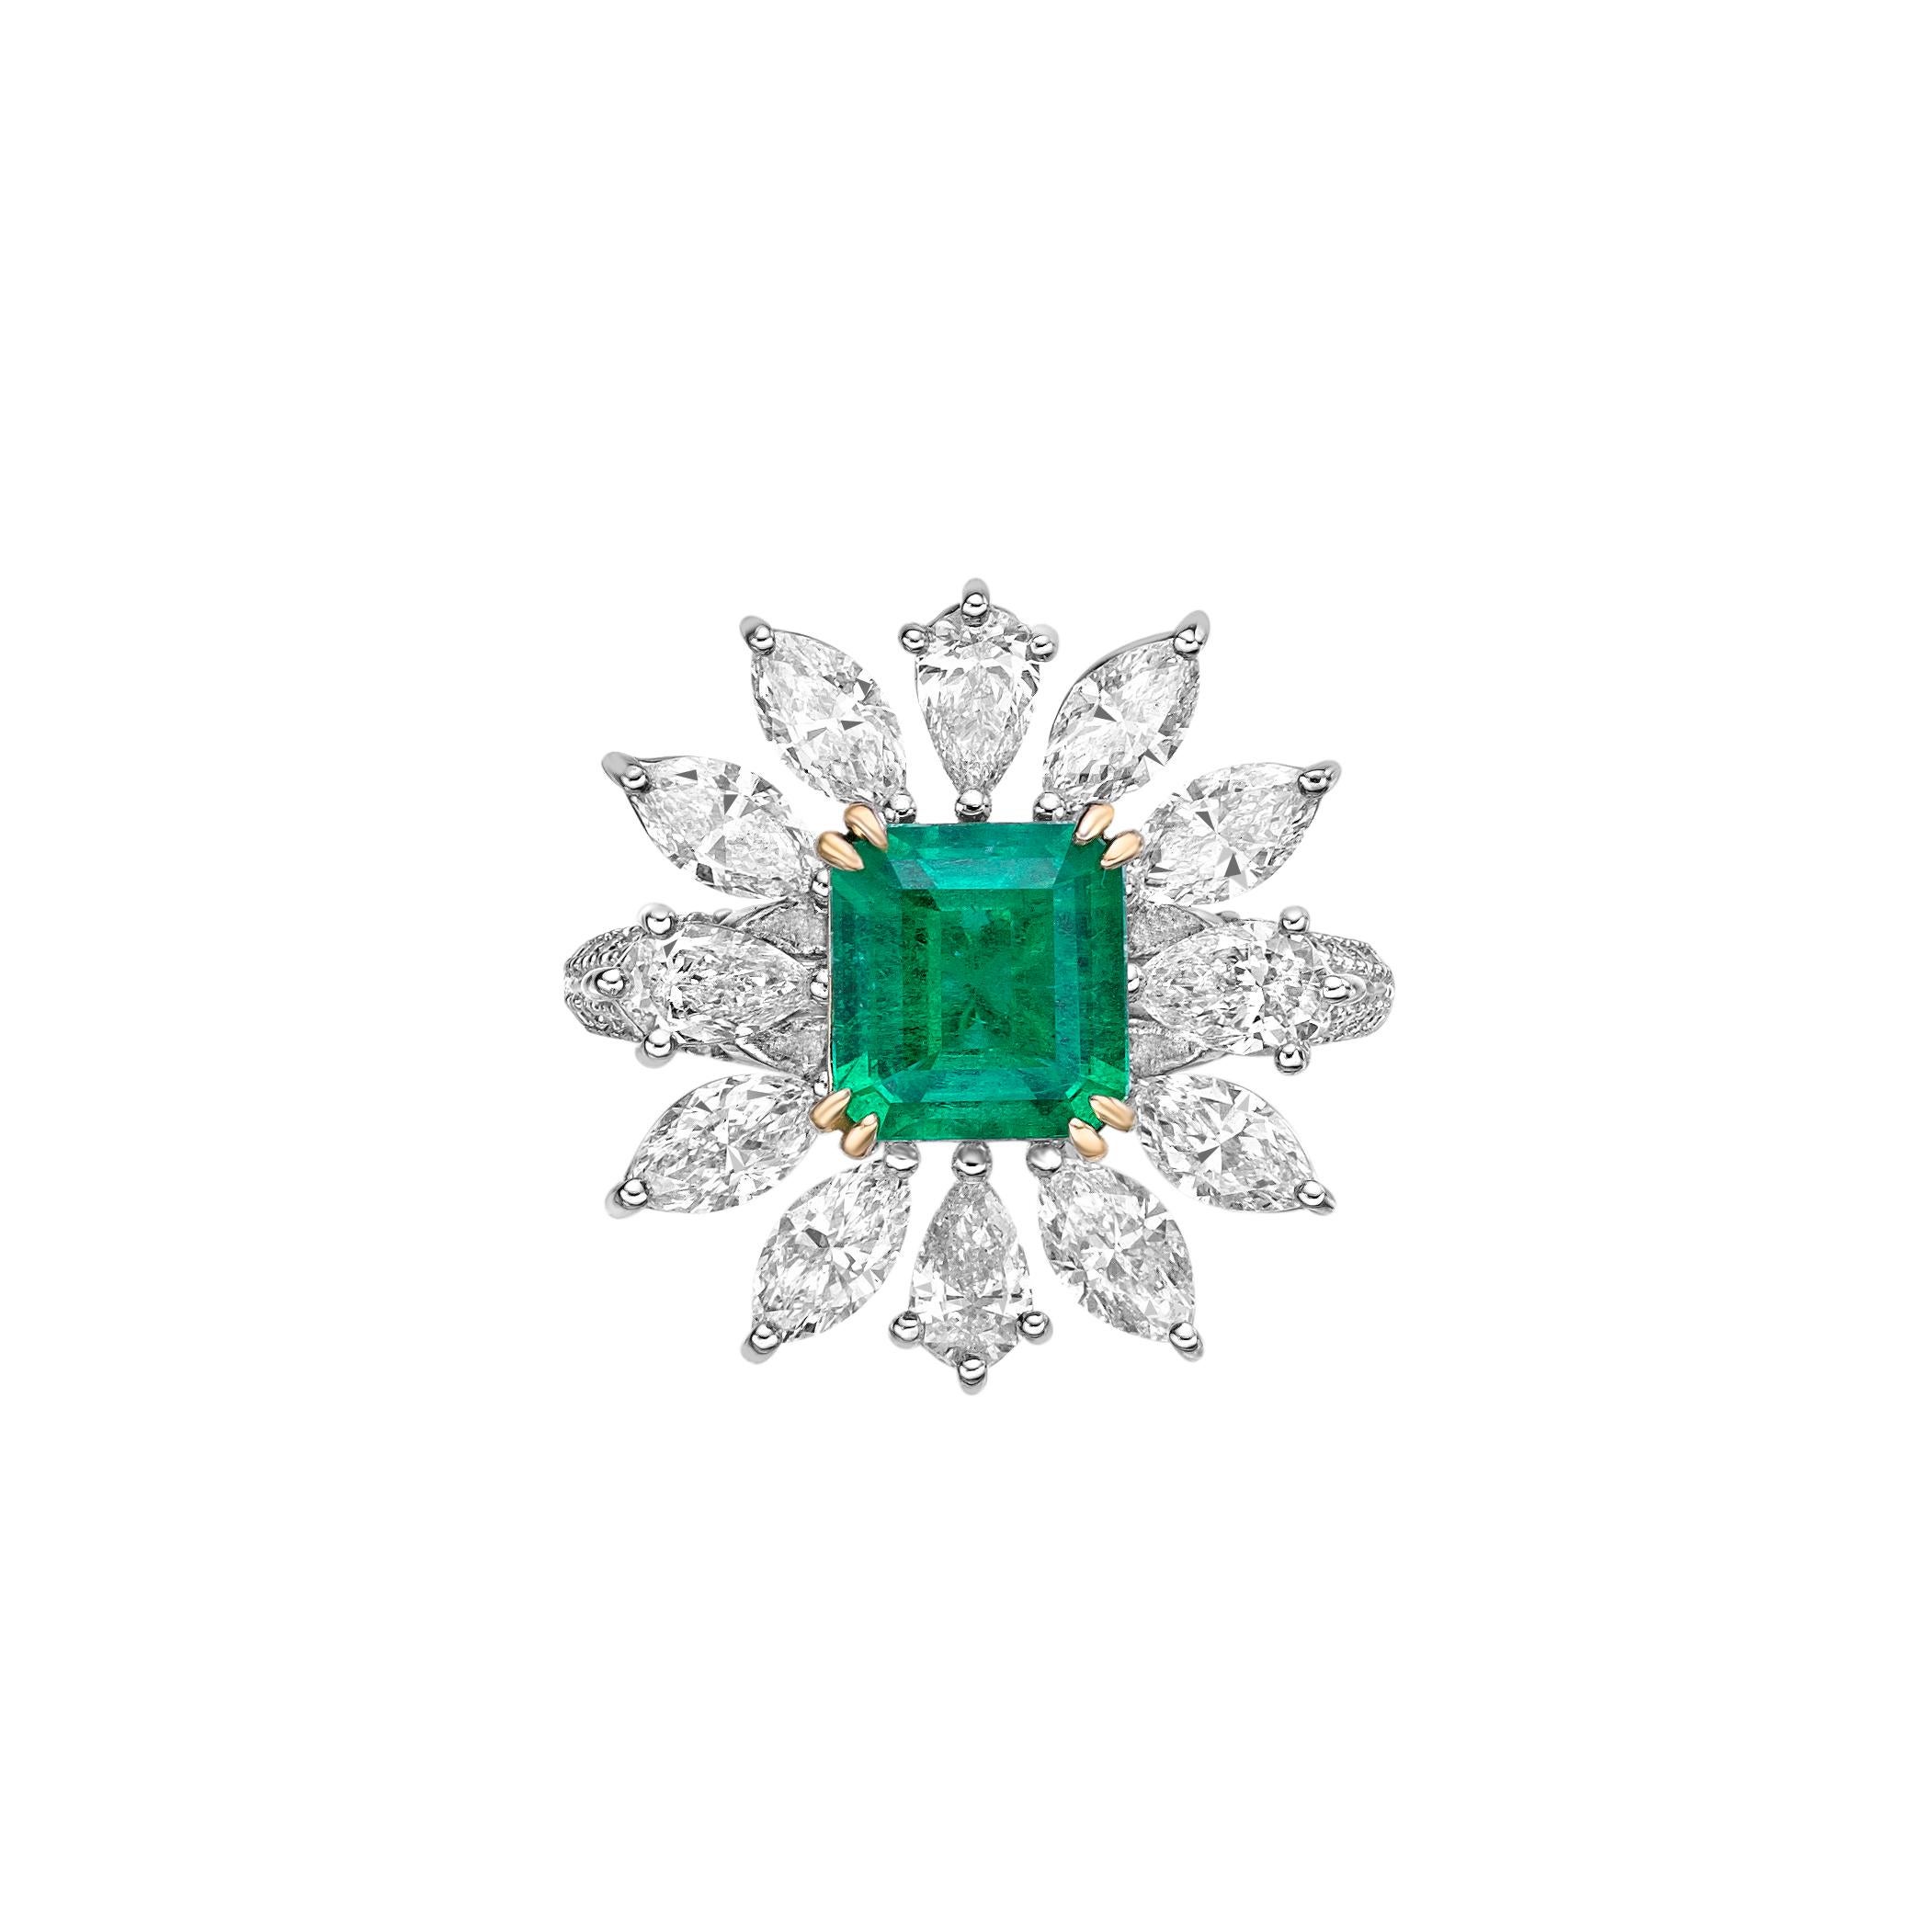 Contemporary 1.69 Carat Sunflower Emerald Bridal Ring in 18KWYG with White Diamond. For Sale